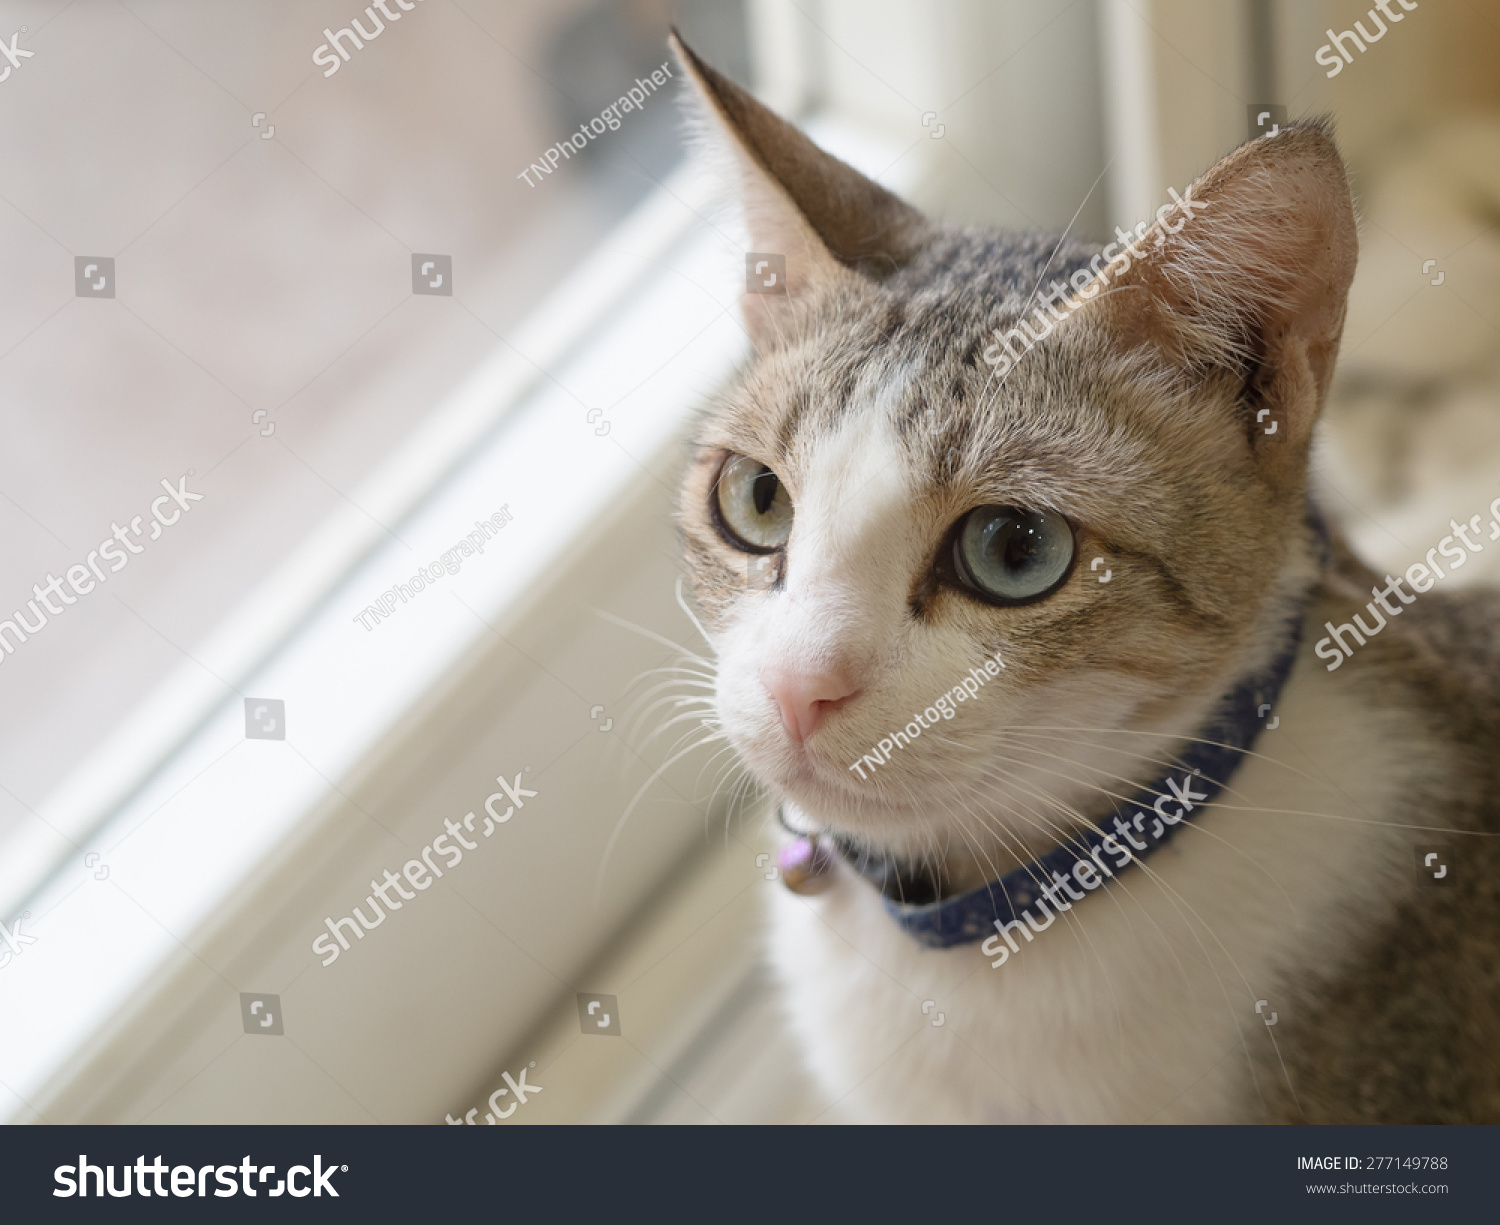 Cat Different Eyes Color Stock Photo 277149788 - Shutterstock